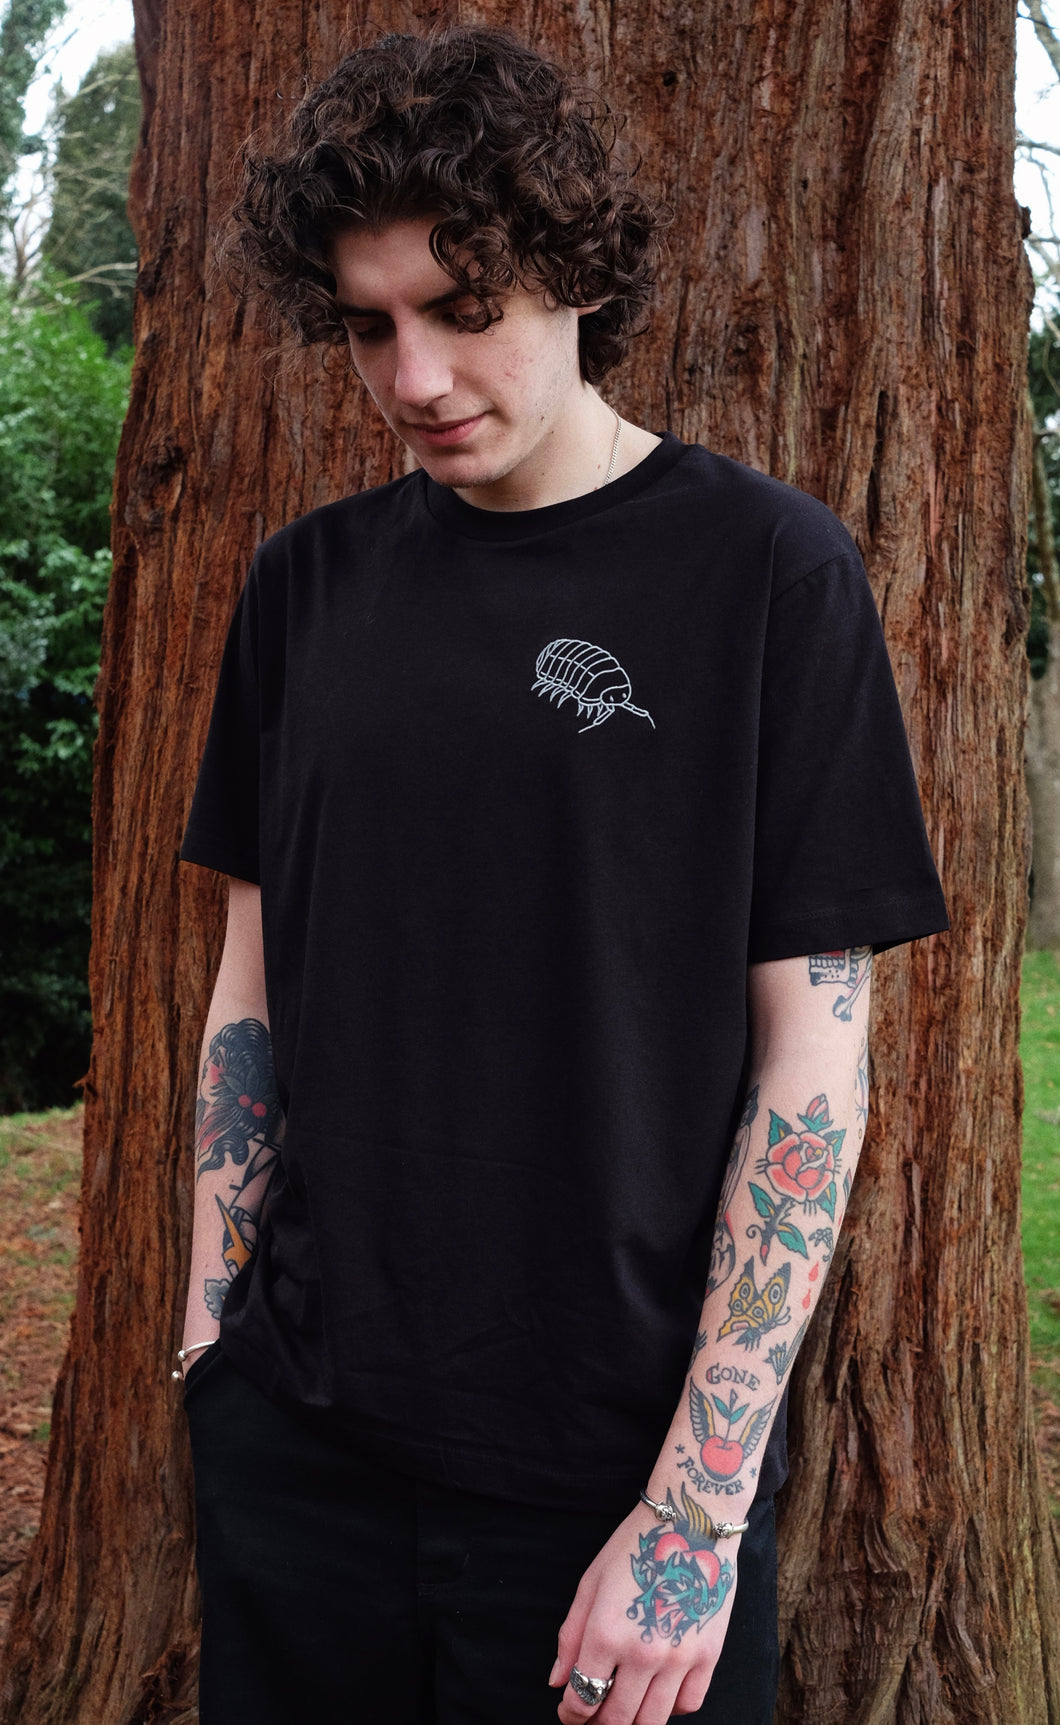 Woodlice Tee by Alexis Camburn